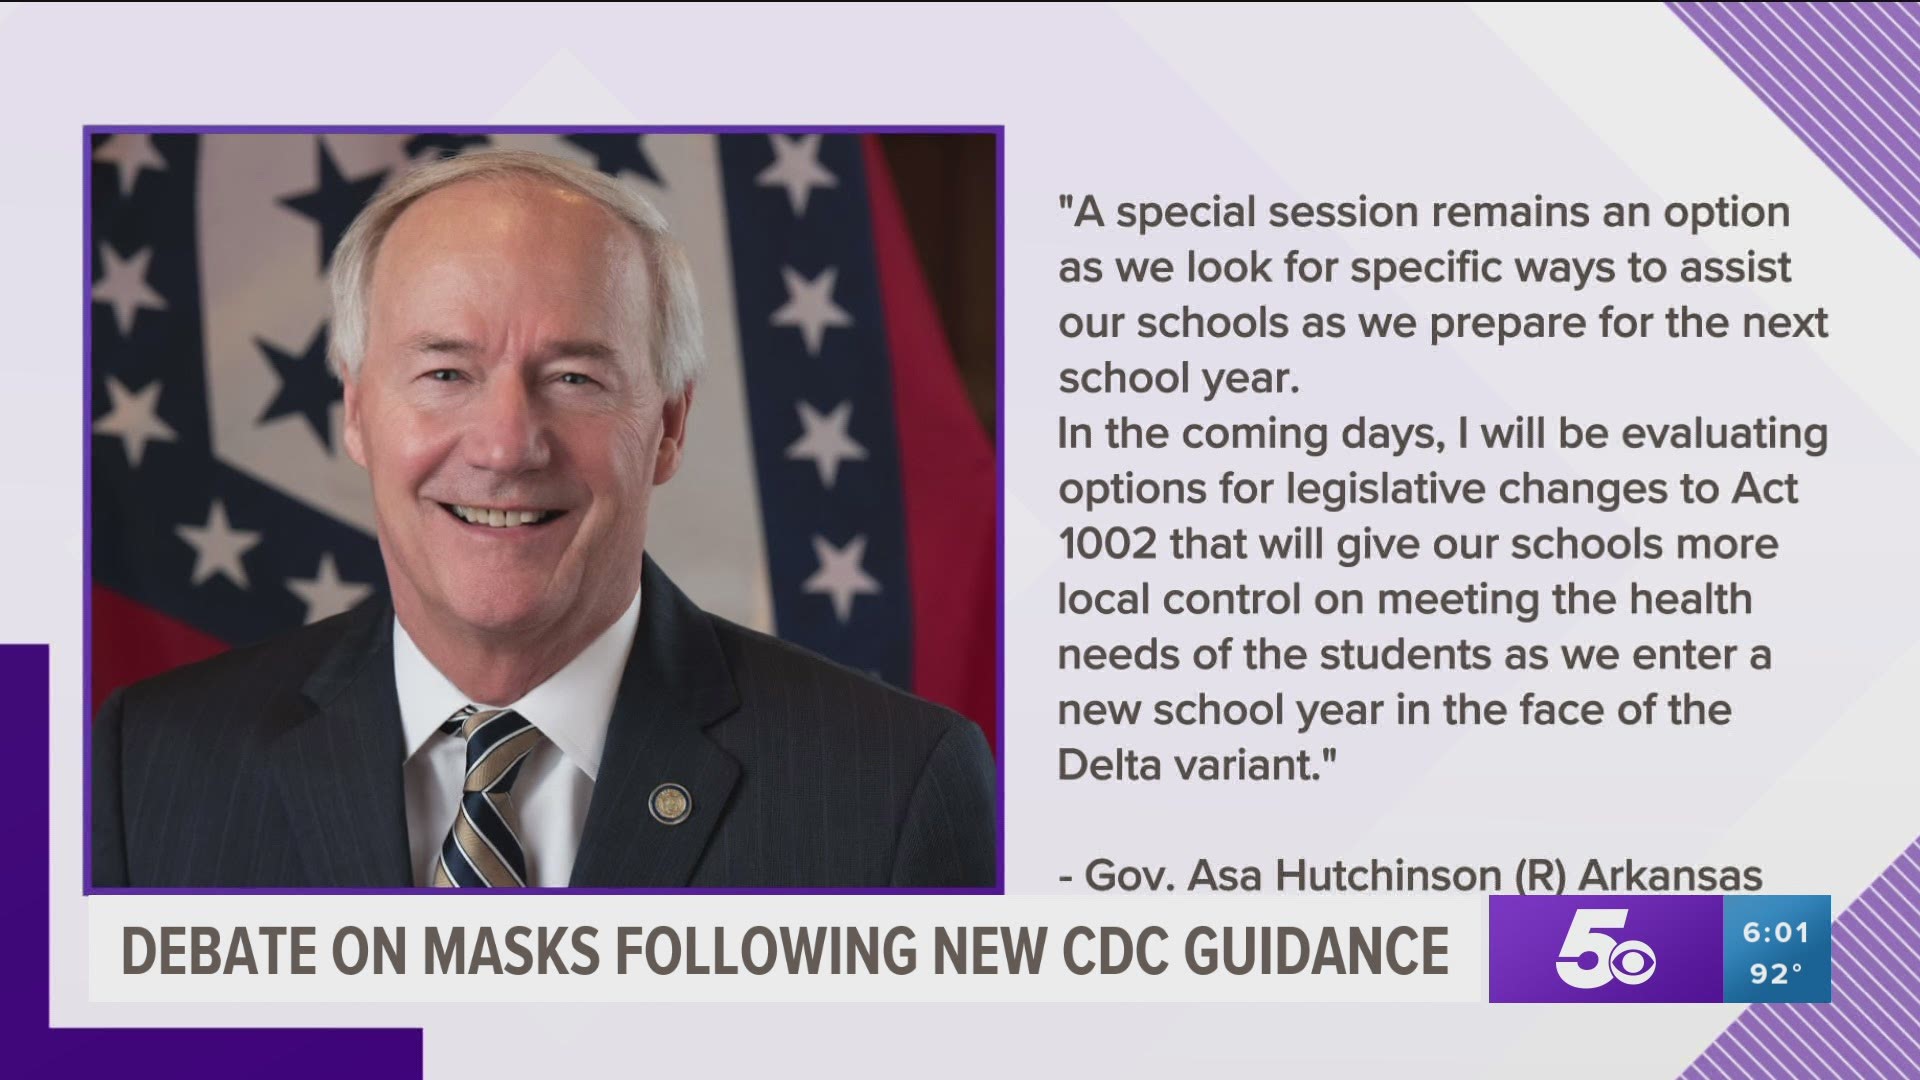 As COVID-19 surges in Arkansas, lawmakers are being asked to reconvene to consider lifting the ban on statewide mask mandates.